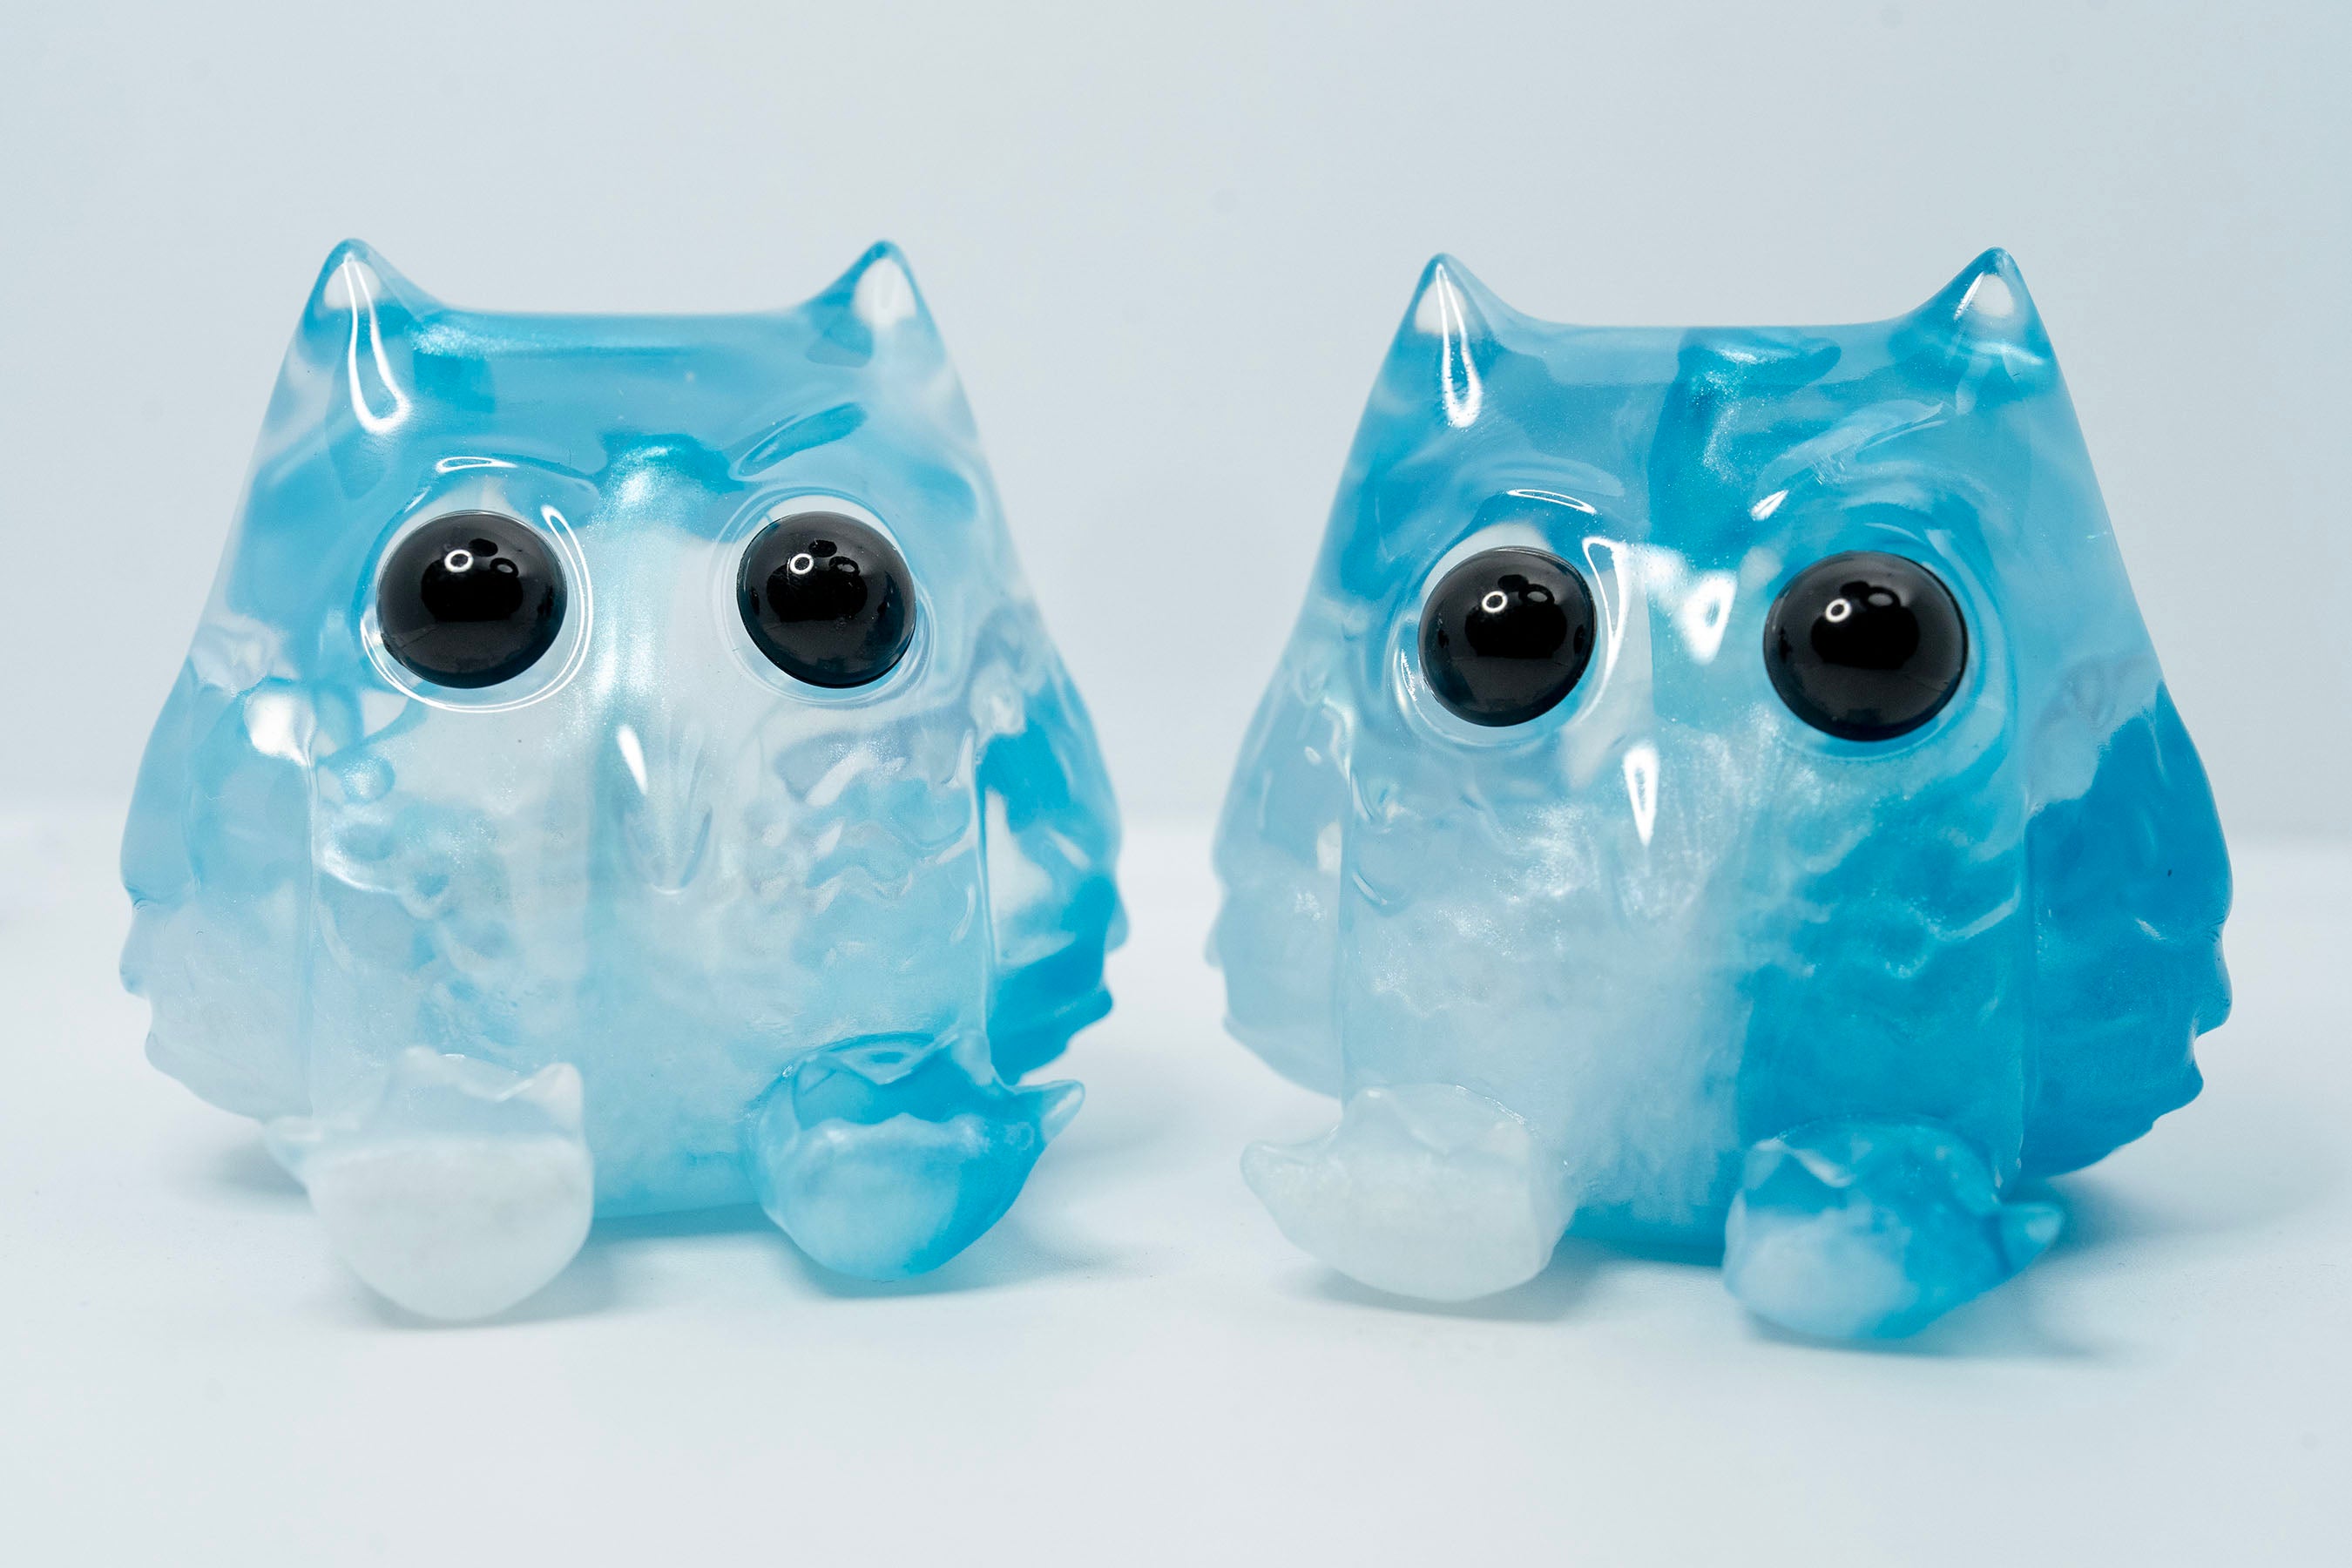 Resin owl toy set by House of Wyze, part of LE 5 pieces blind box collection. Ships randomly after show opening.